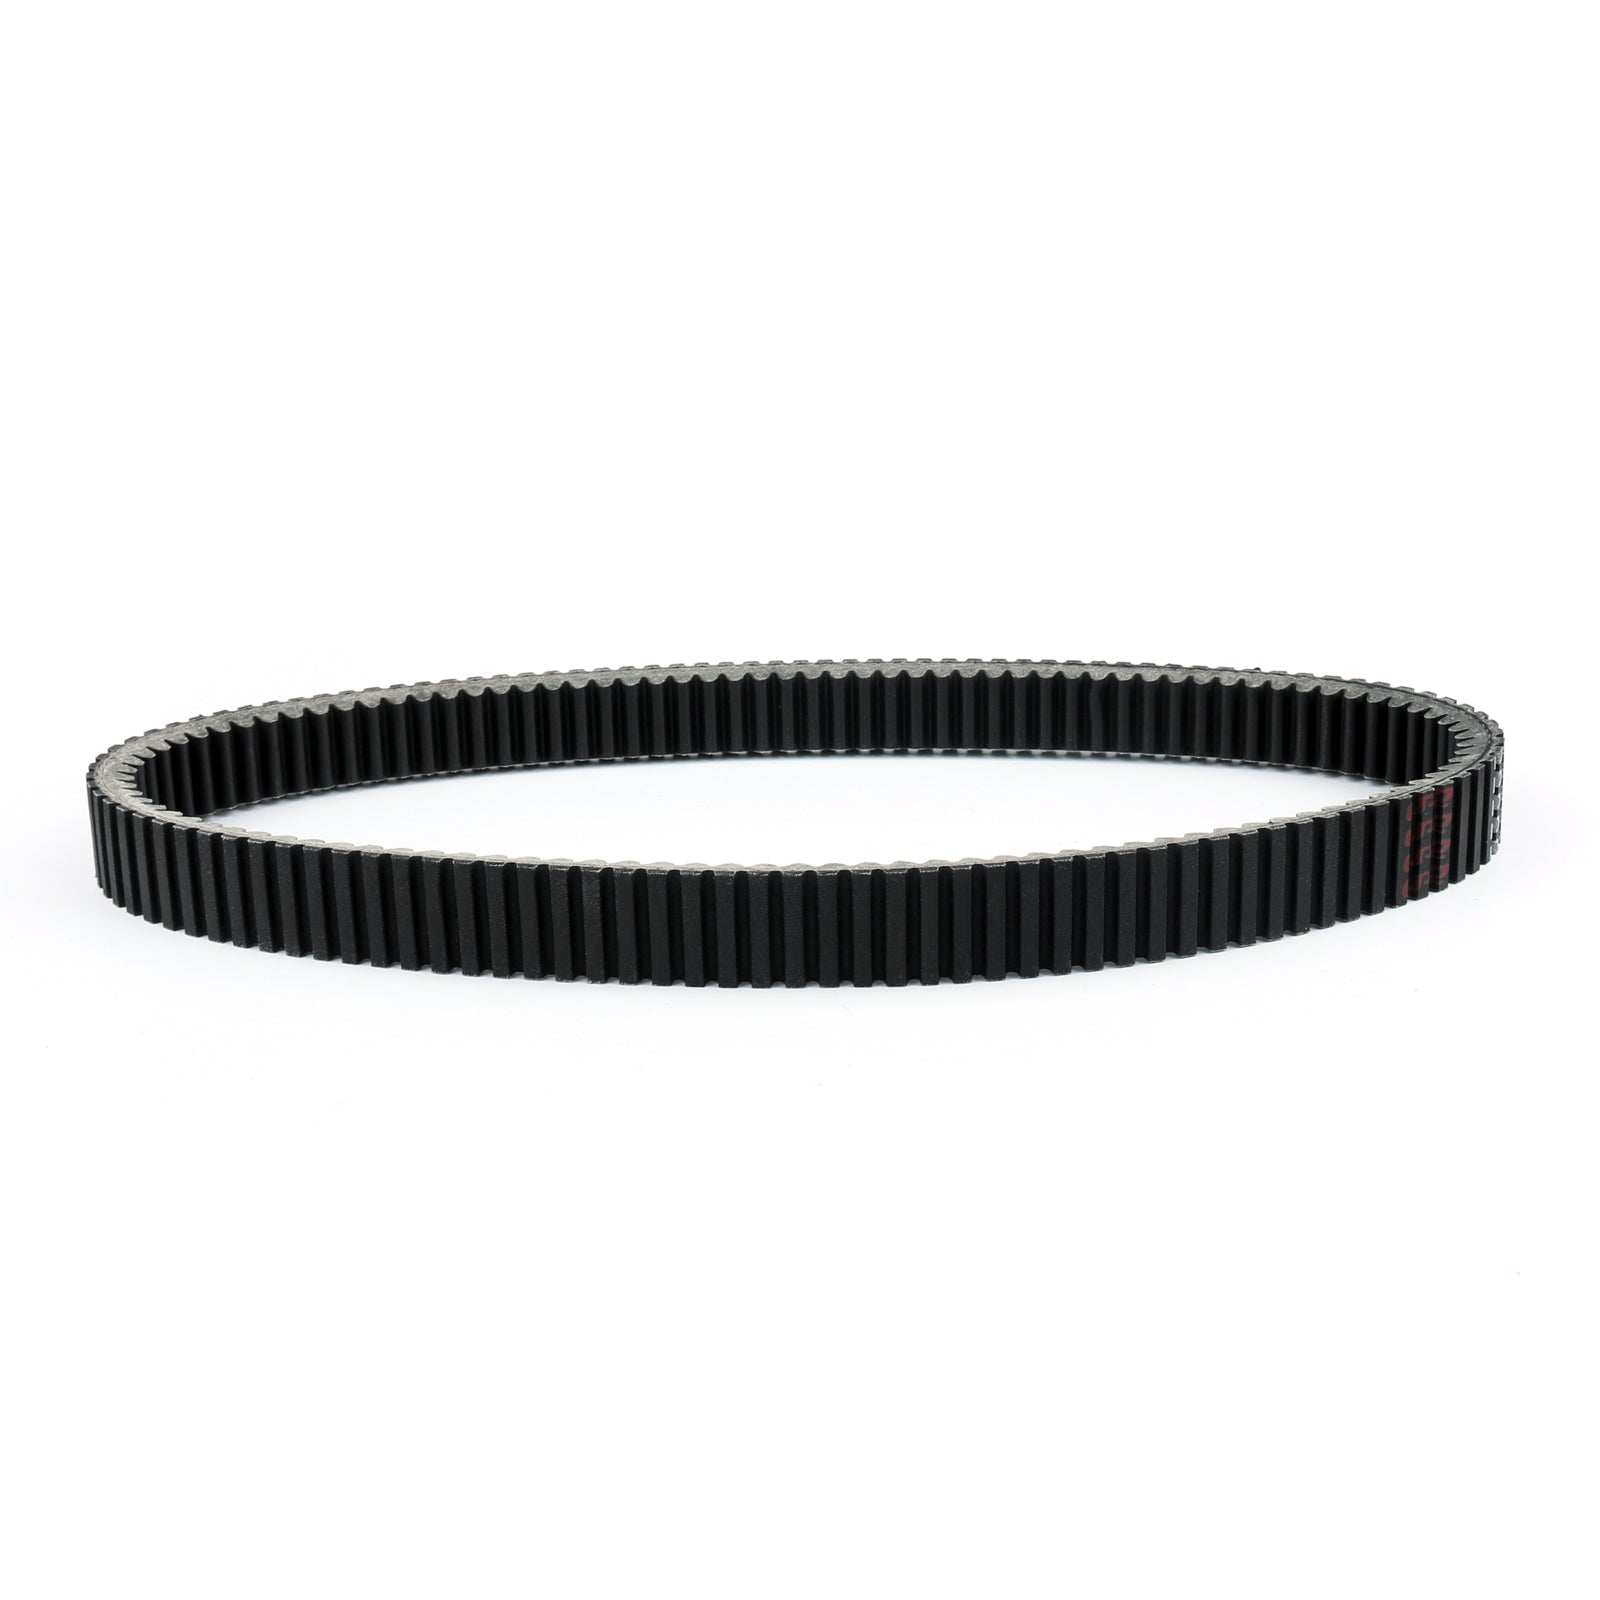 8DN-17641-01 Drive Belt Fit For Yamaha RX1 Mountain RX10M 2003-2005 VK Professional VK10 2007 RX1 RX10 2003-2005